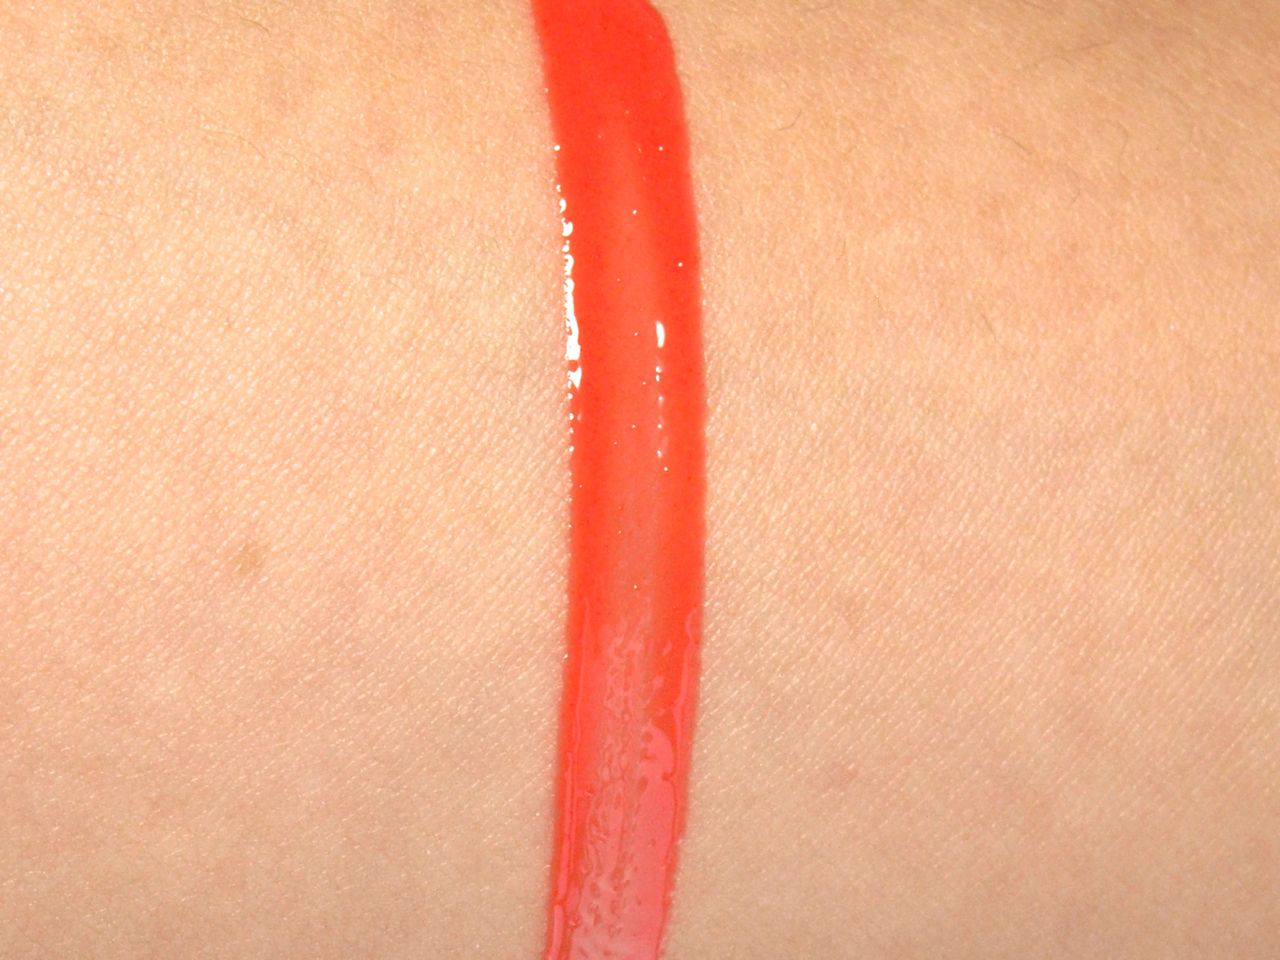 purminerals big lip gloss in foxy review swatches